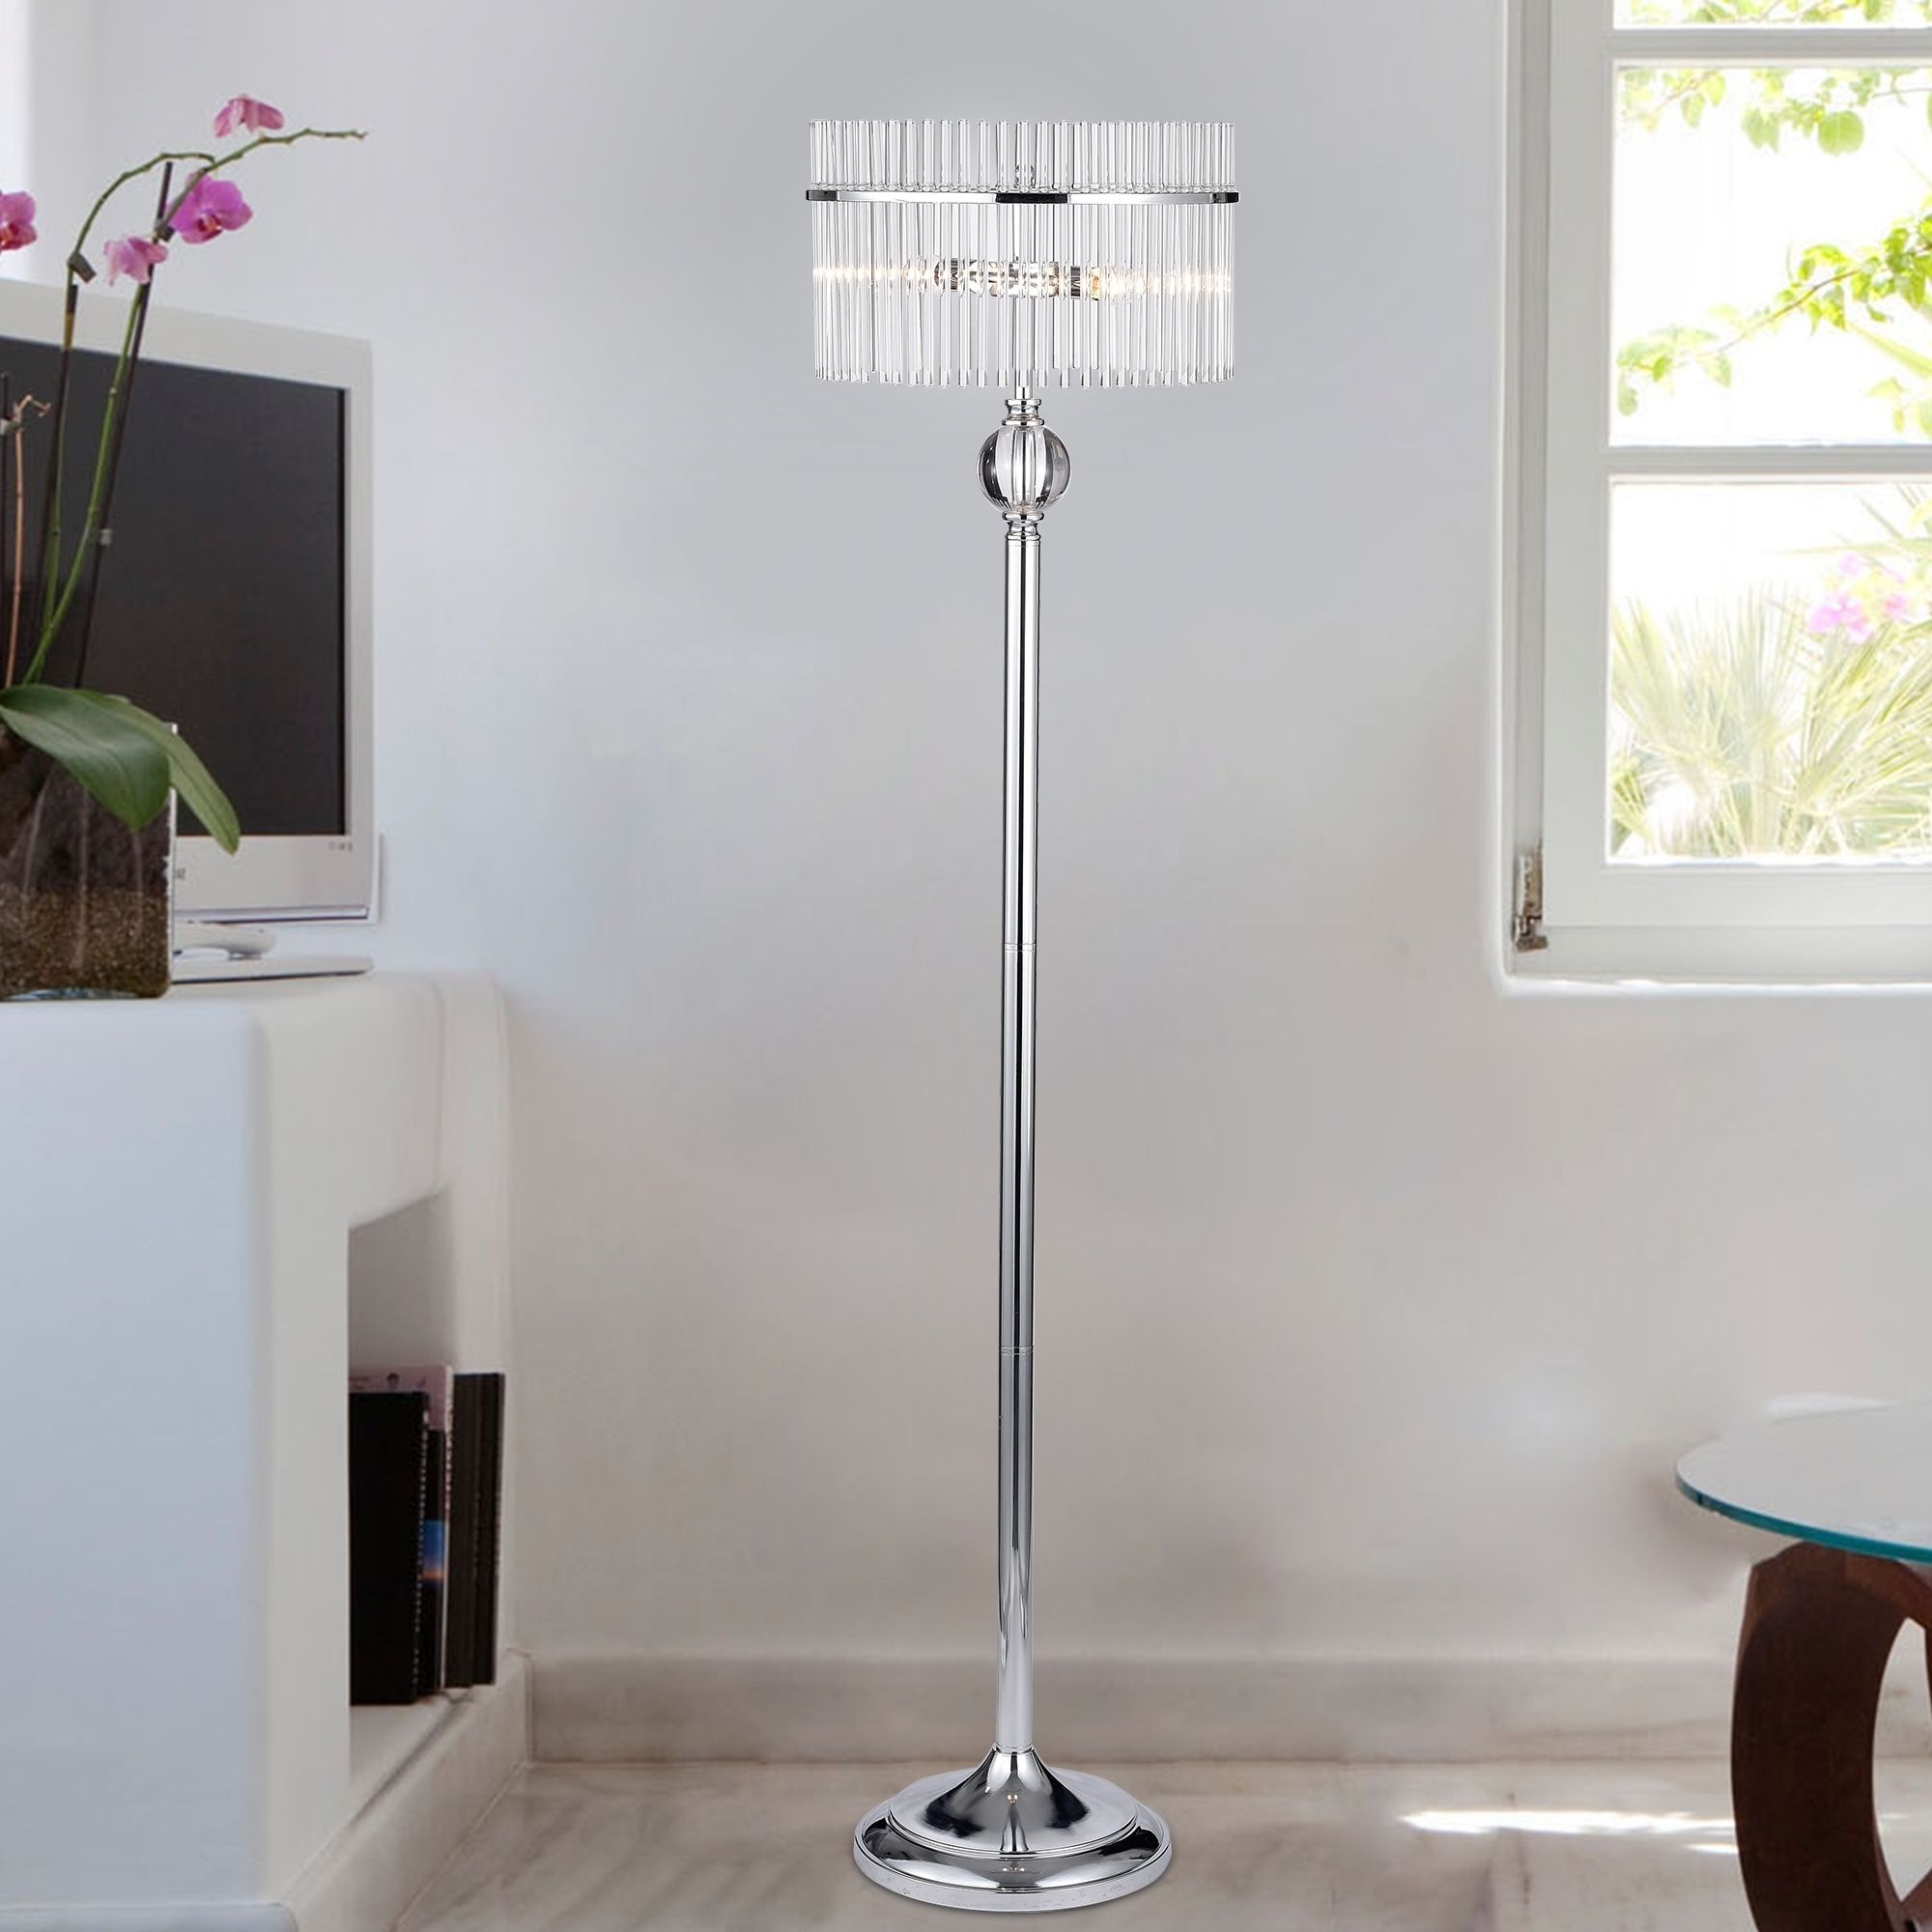 [%brushed Silver Floor Lamp Outlet, 41% Off | Fames.br Throughout 2019 Chrome Crystal Tower Standing Lamps|chrome Crystal Tower Standing Lamps Throughout Fashionable Brushed Silver Floor Lamp Outlet, 41% Off | Fames.br|most Up To Date Chrome Crystal Tower Standing Lamps With Regard To Brushed Silver Floor Lamp Outlet, 41% Off | Fames.br|2019 Brushed Silver Floor Lamp Outlet, 41% Off | Fames (View 10 of 10)